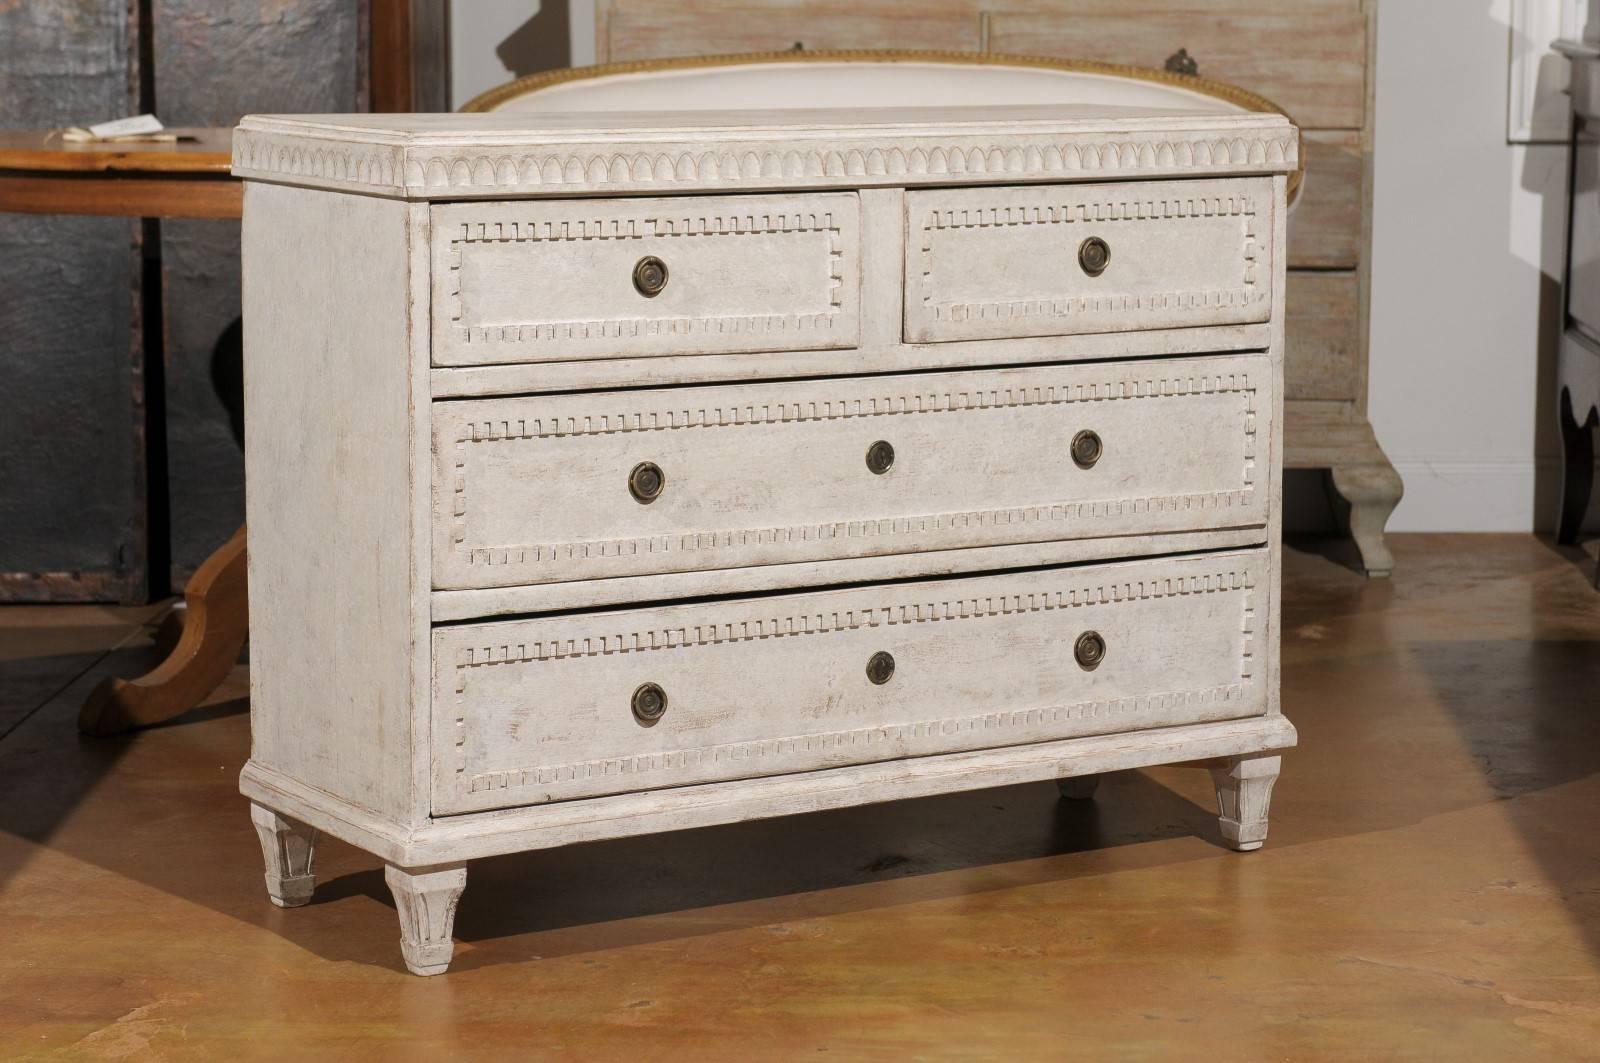 Swedish 19th century painted commode with four drawers.